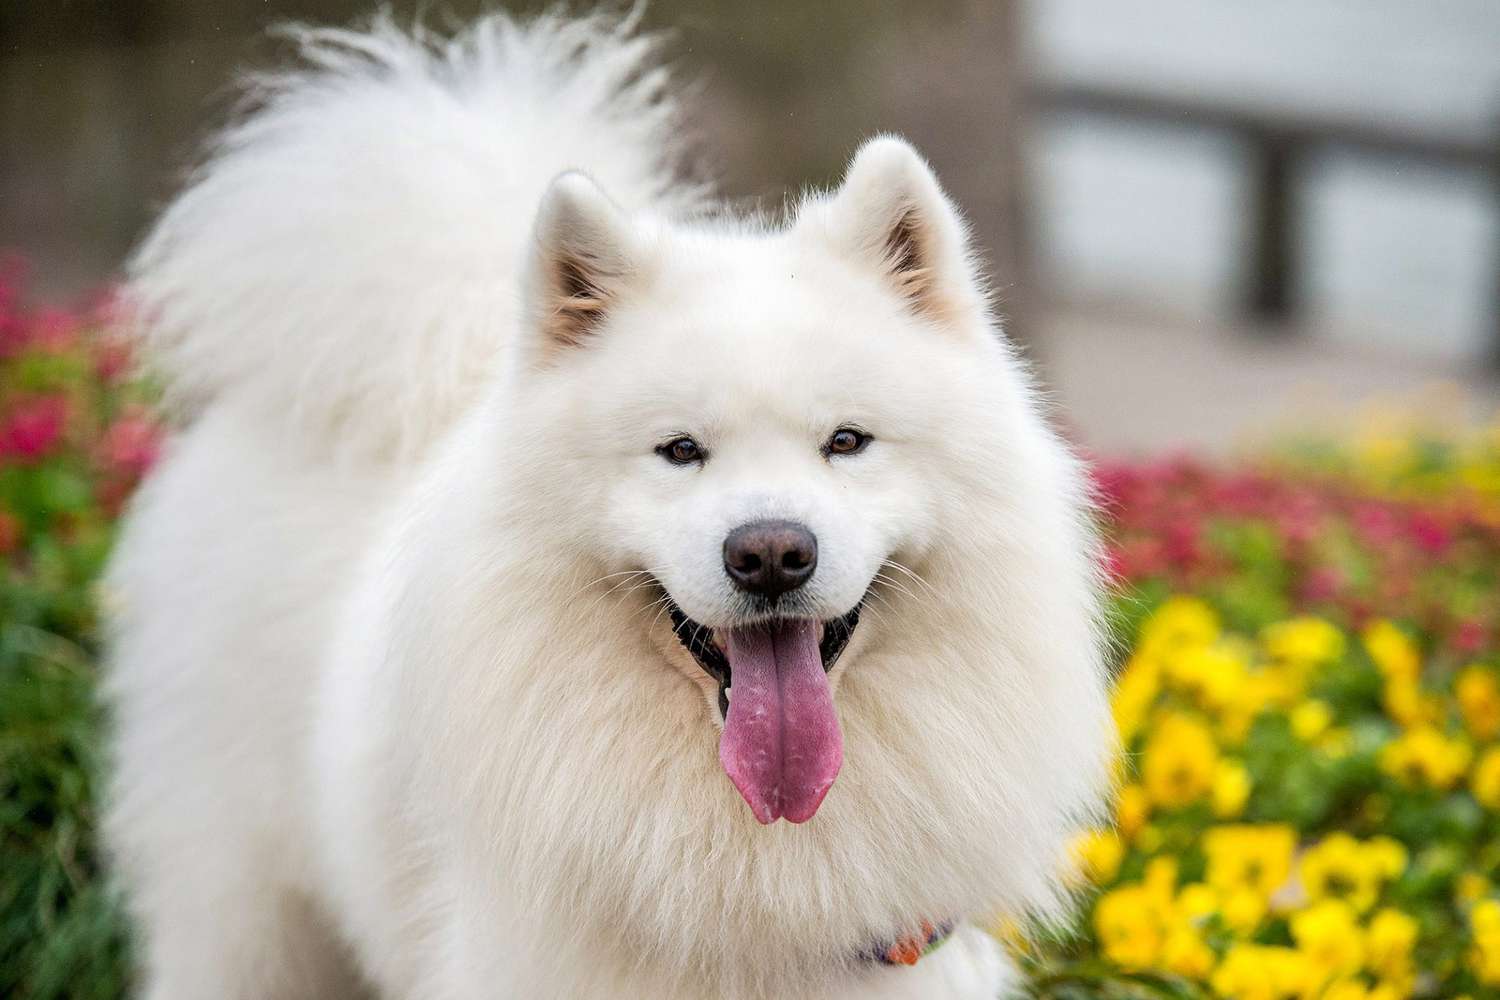 white samoyed dog smiling at camera with fiedl fo flowers in background